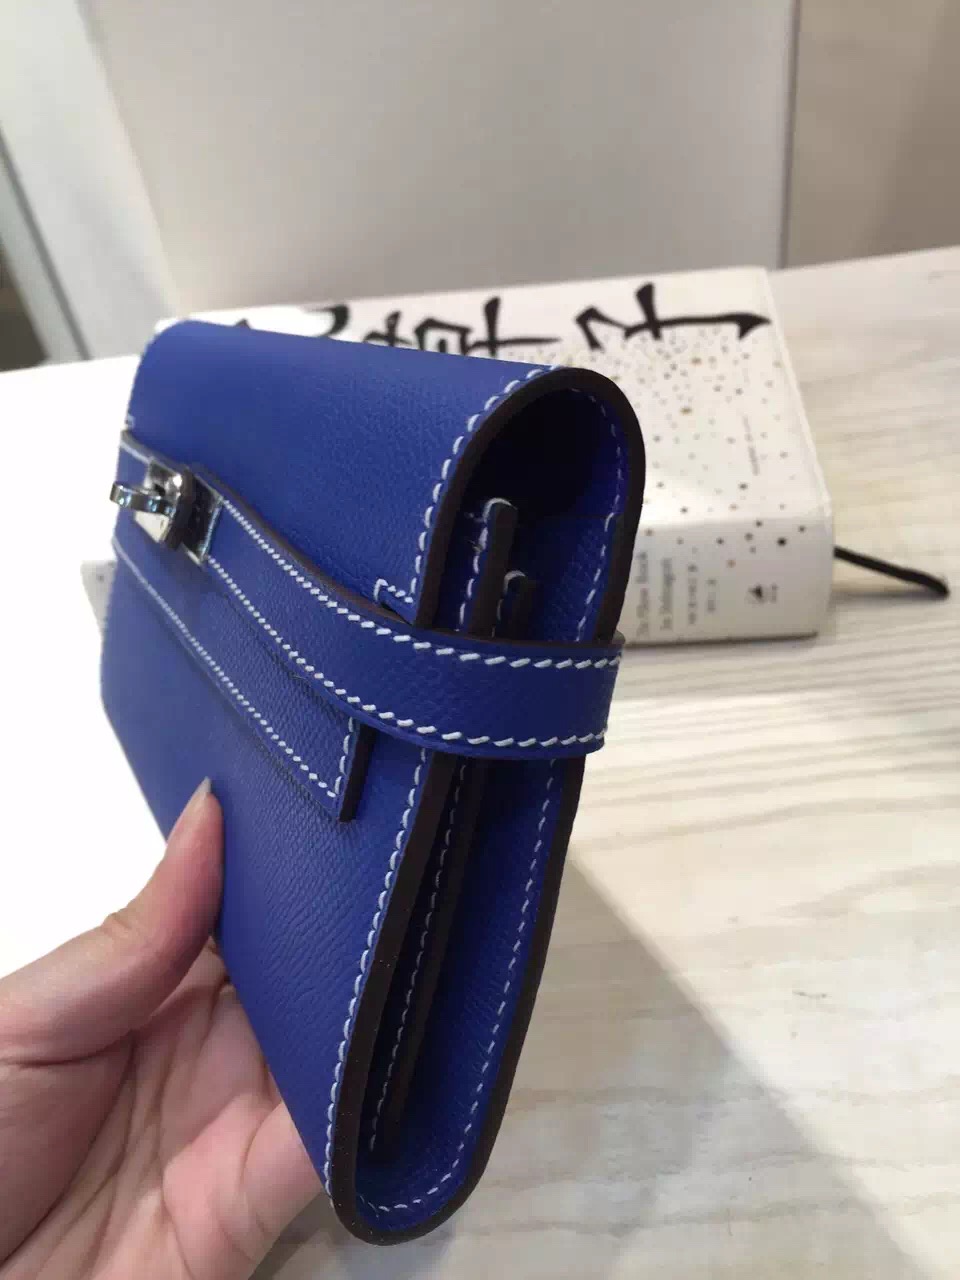 Wholesale Hermes Kelly Wallet Blue Electric Epsom Leather Clutch